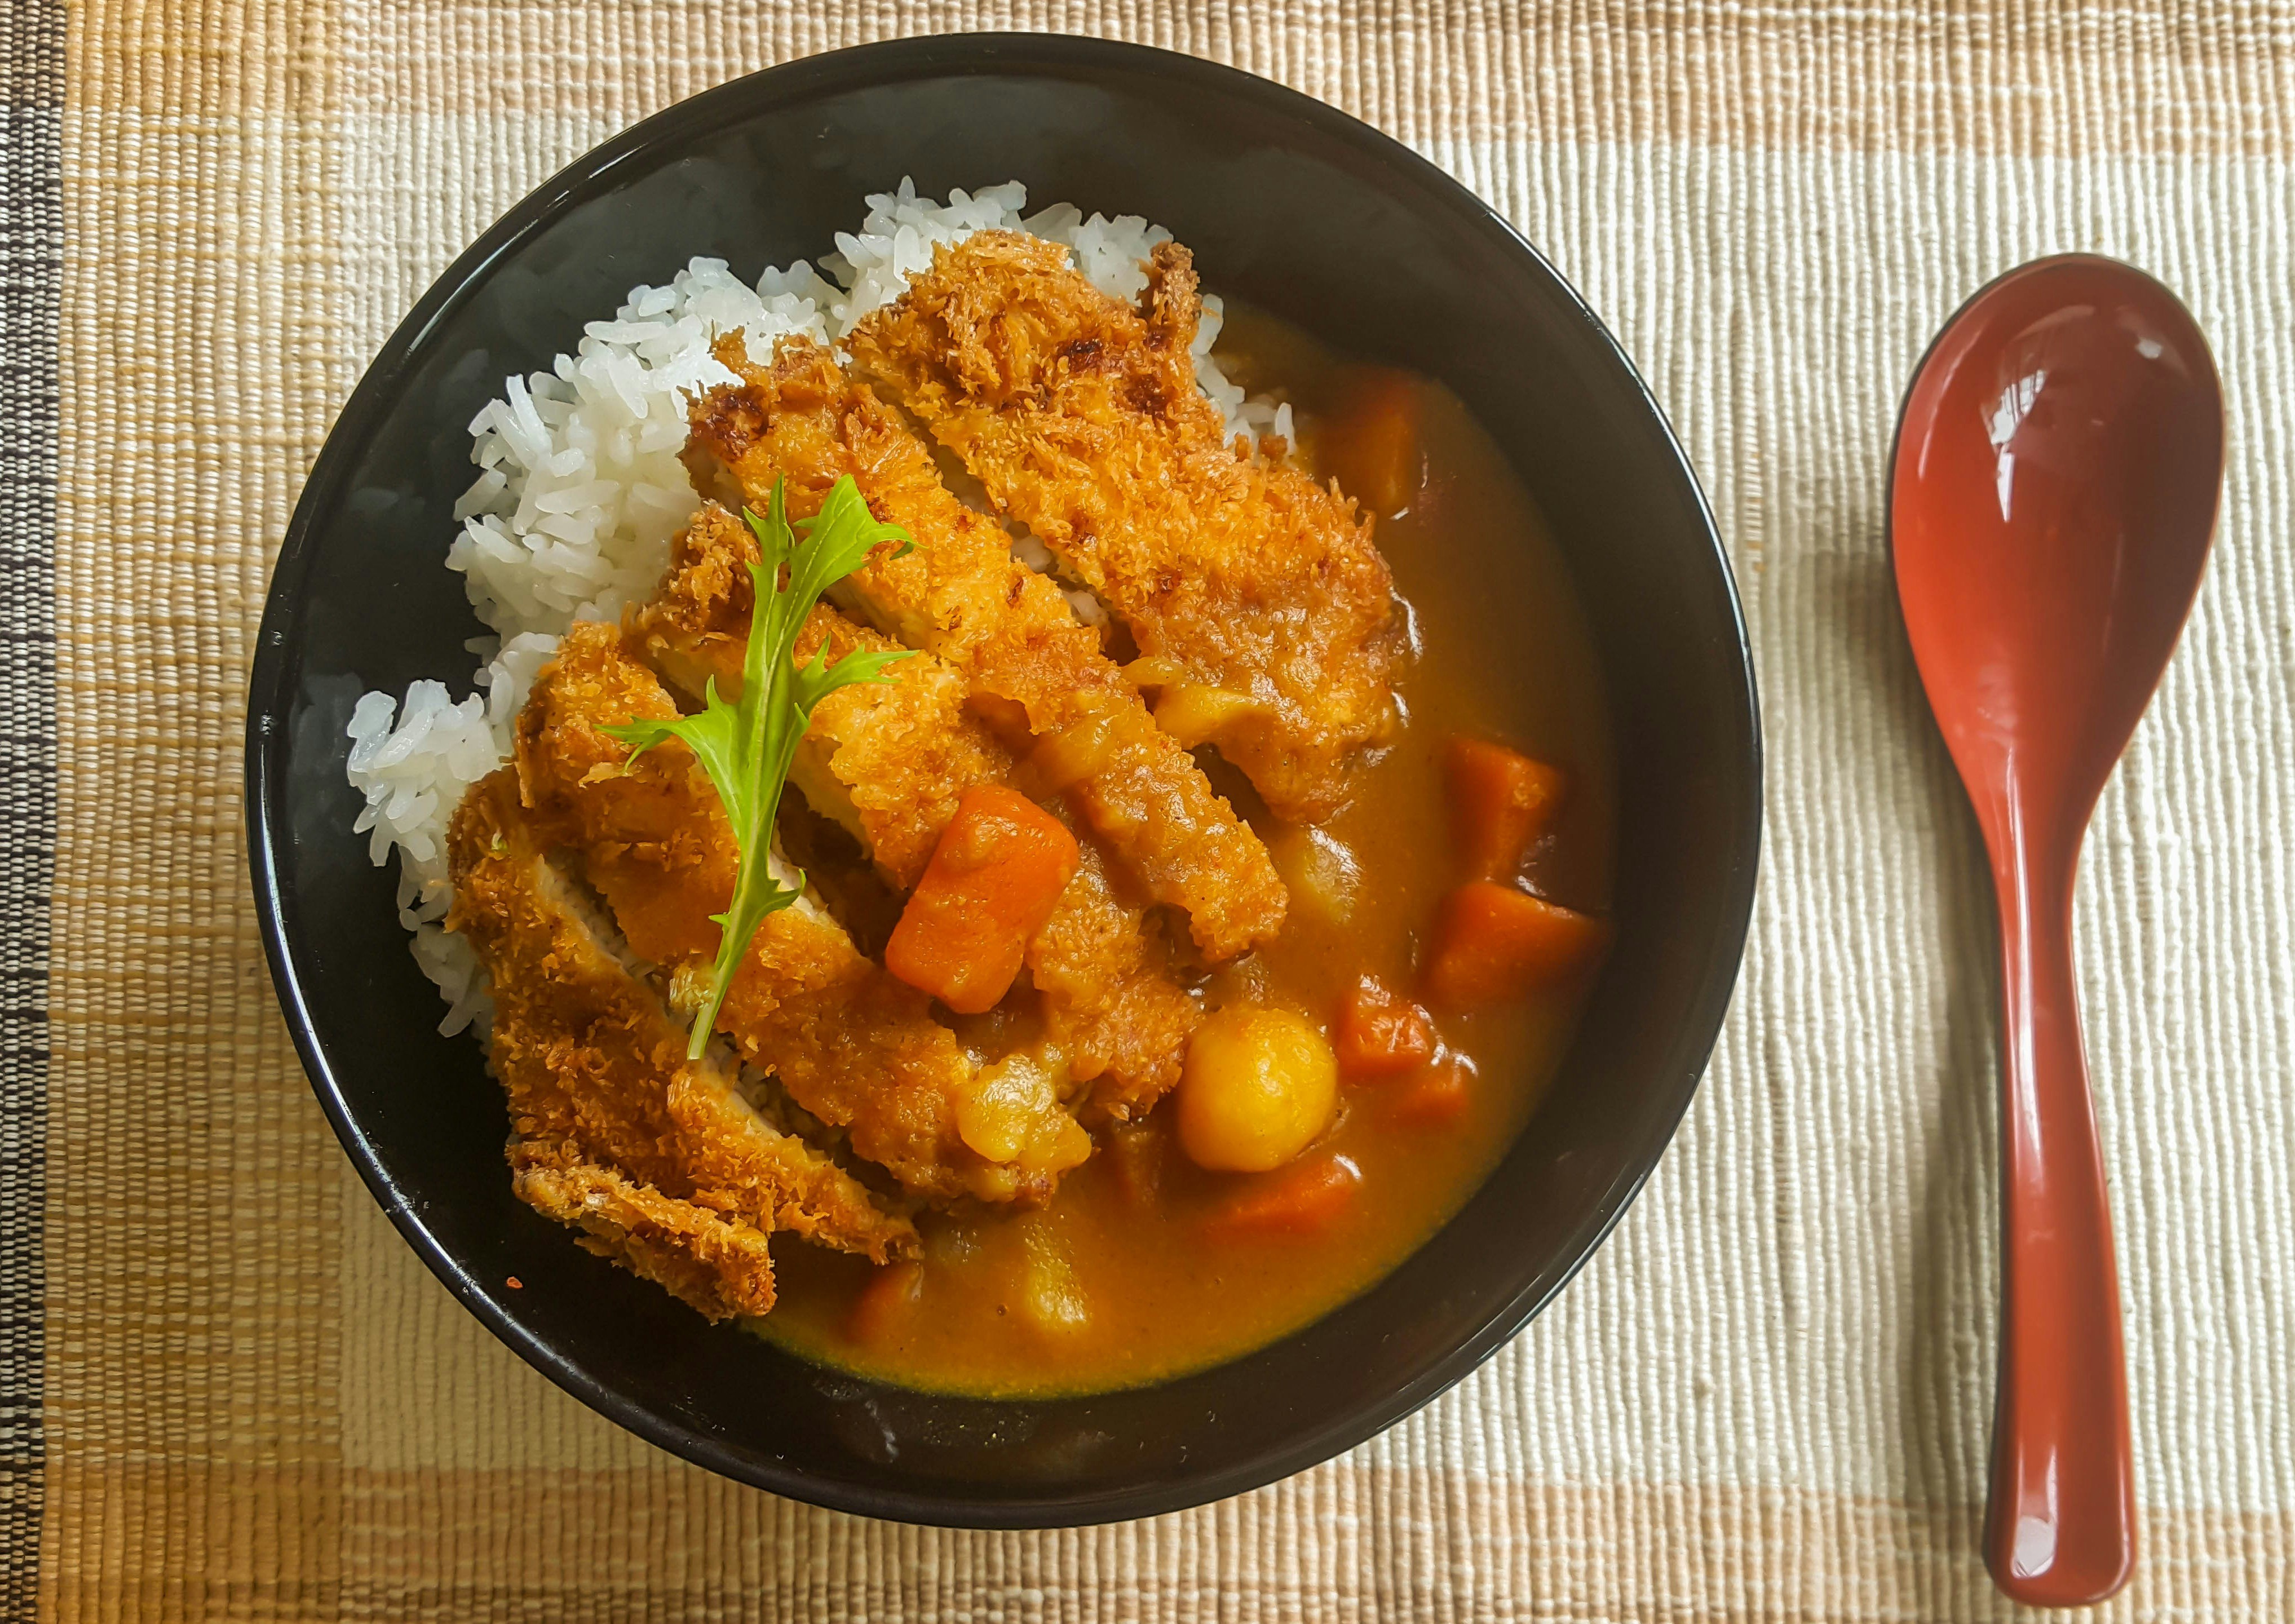 A top-down view of a plate of katsu curry: a Japanese dish consisting of meat in breadcrumbs, rice and a thick curry sauce.